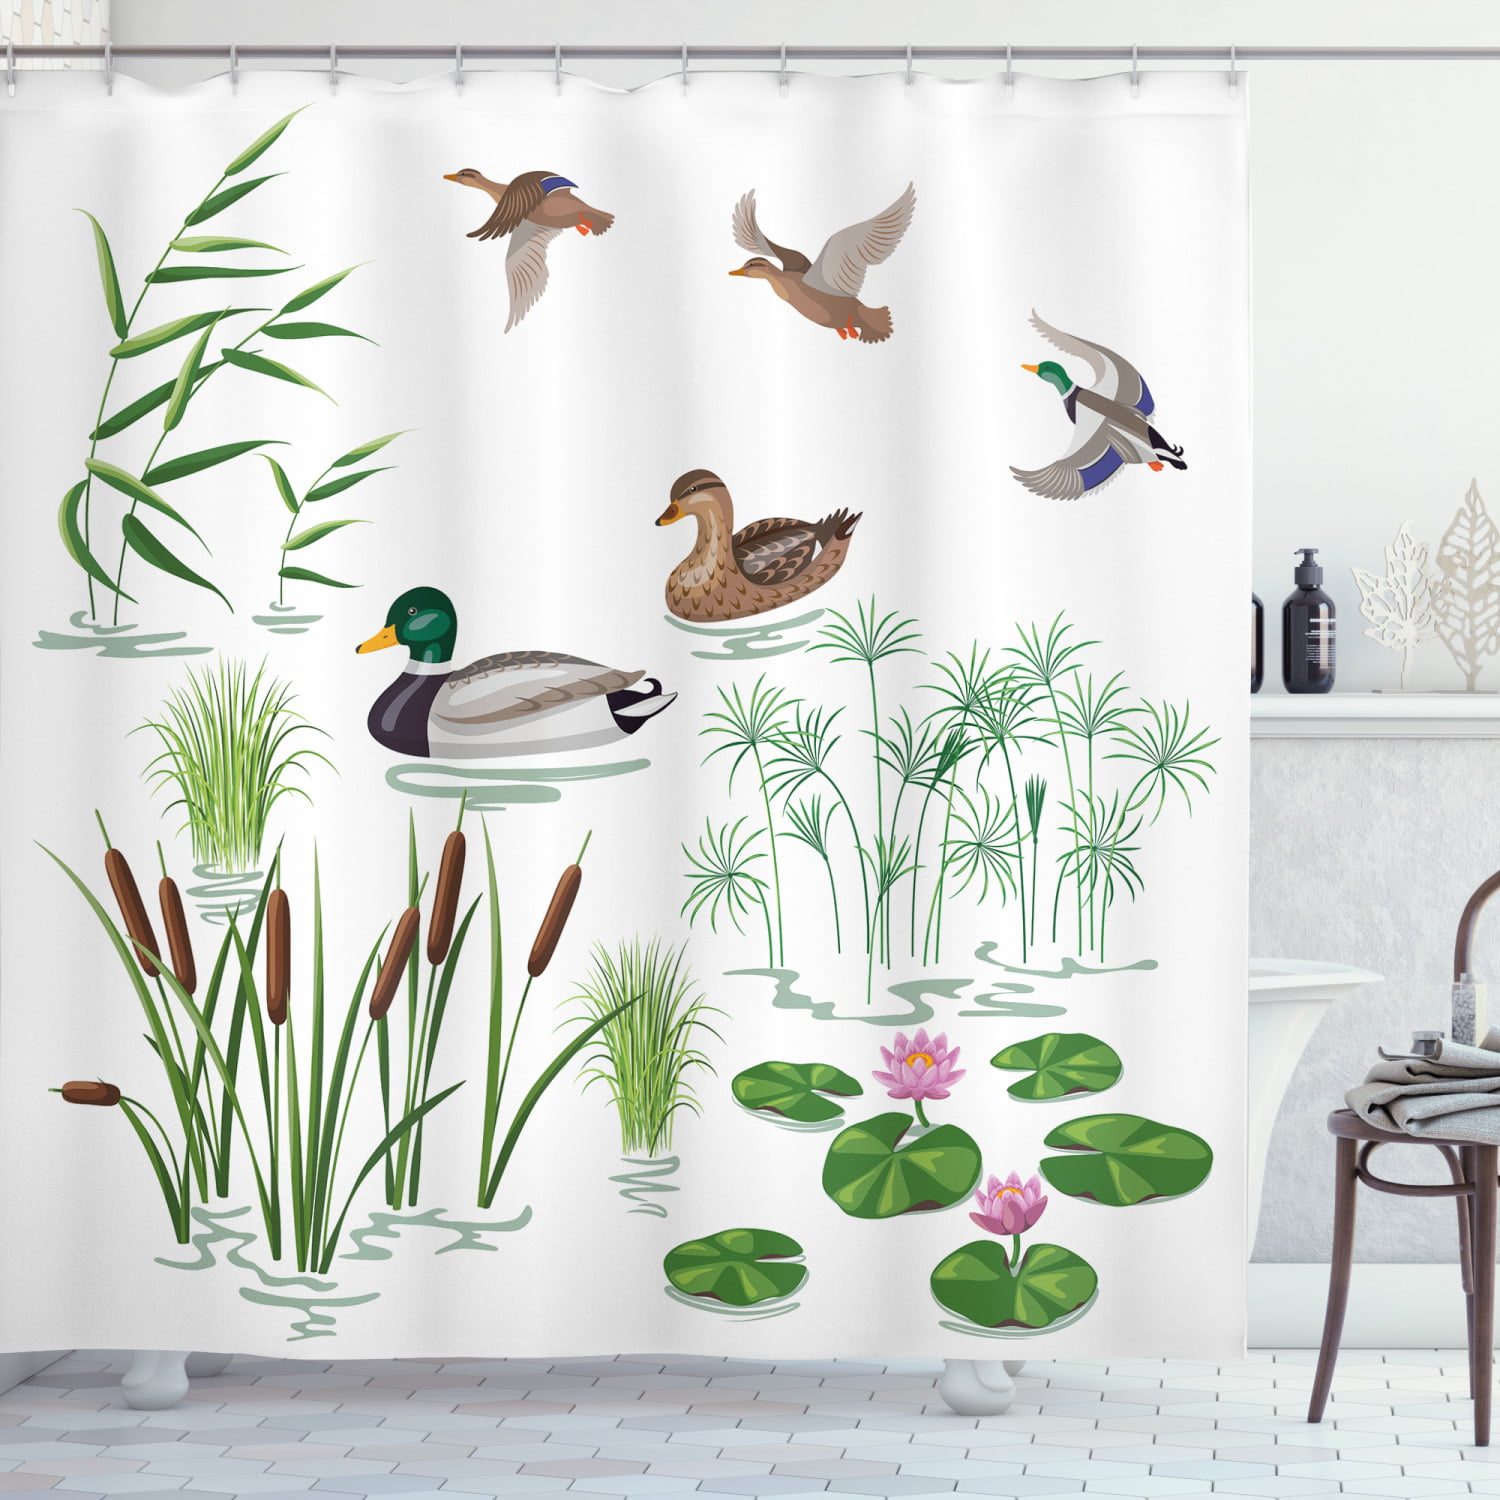 Floating Duck in Shower on Lily Pad for Garden Ponds a Useful Present or Gift 